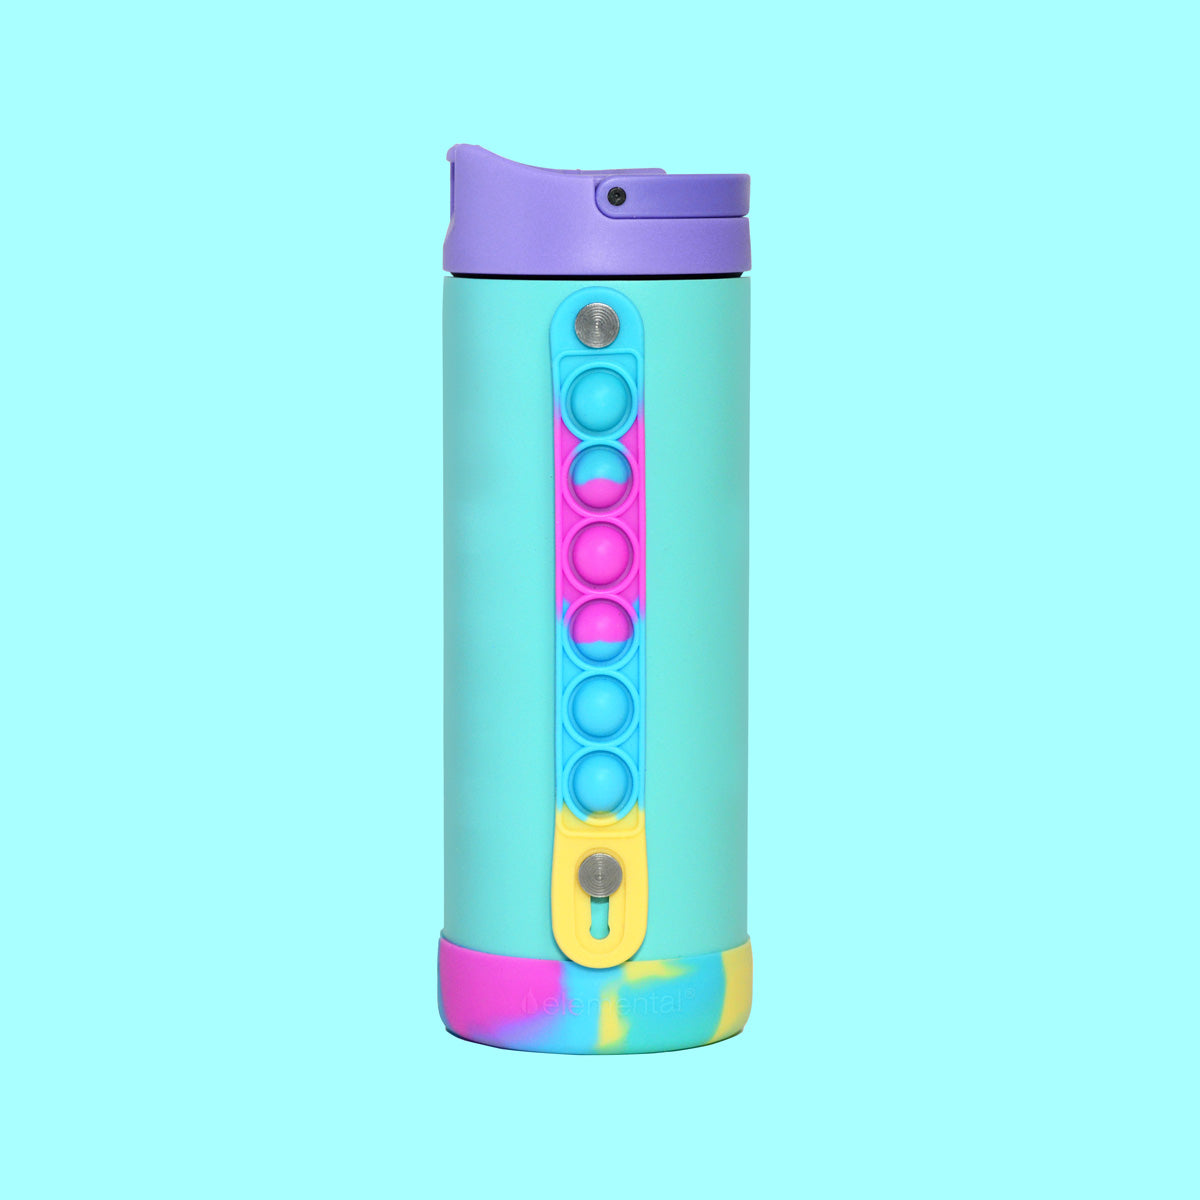 Elemental 14oz Navy Blue Fun Personalized Water Bottle for Kids with Pop Fidget Strap, Leakproof, Wide Mouth and Anti-Microbial Spout BPA Free